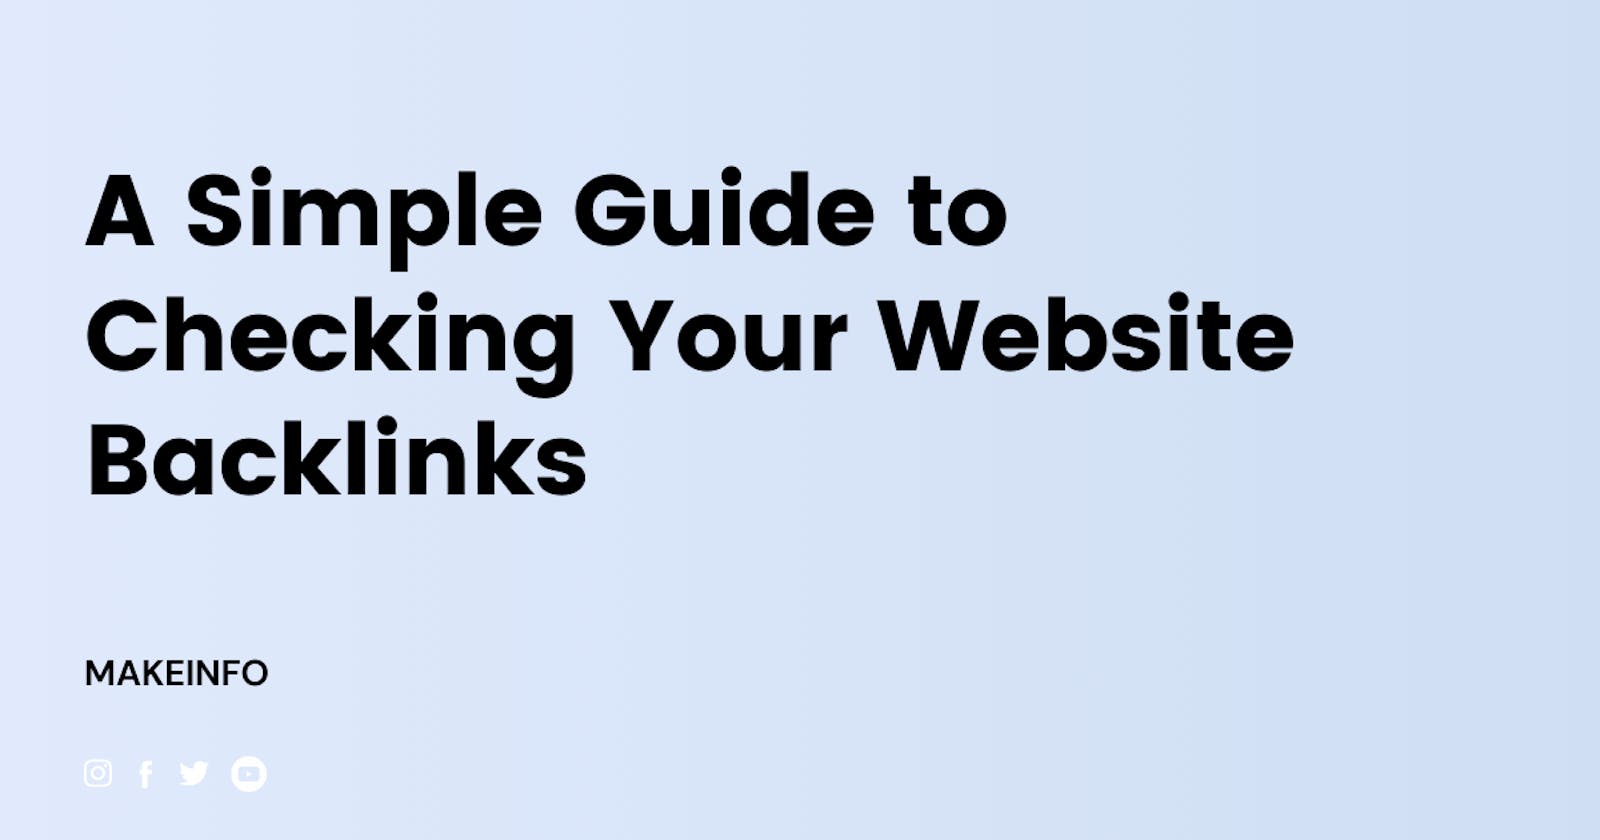 A Simple Guide to Checking Your Website Backlinks